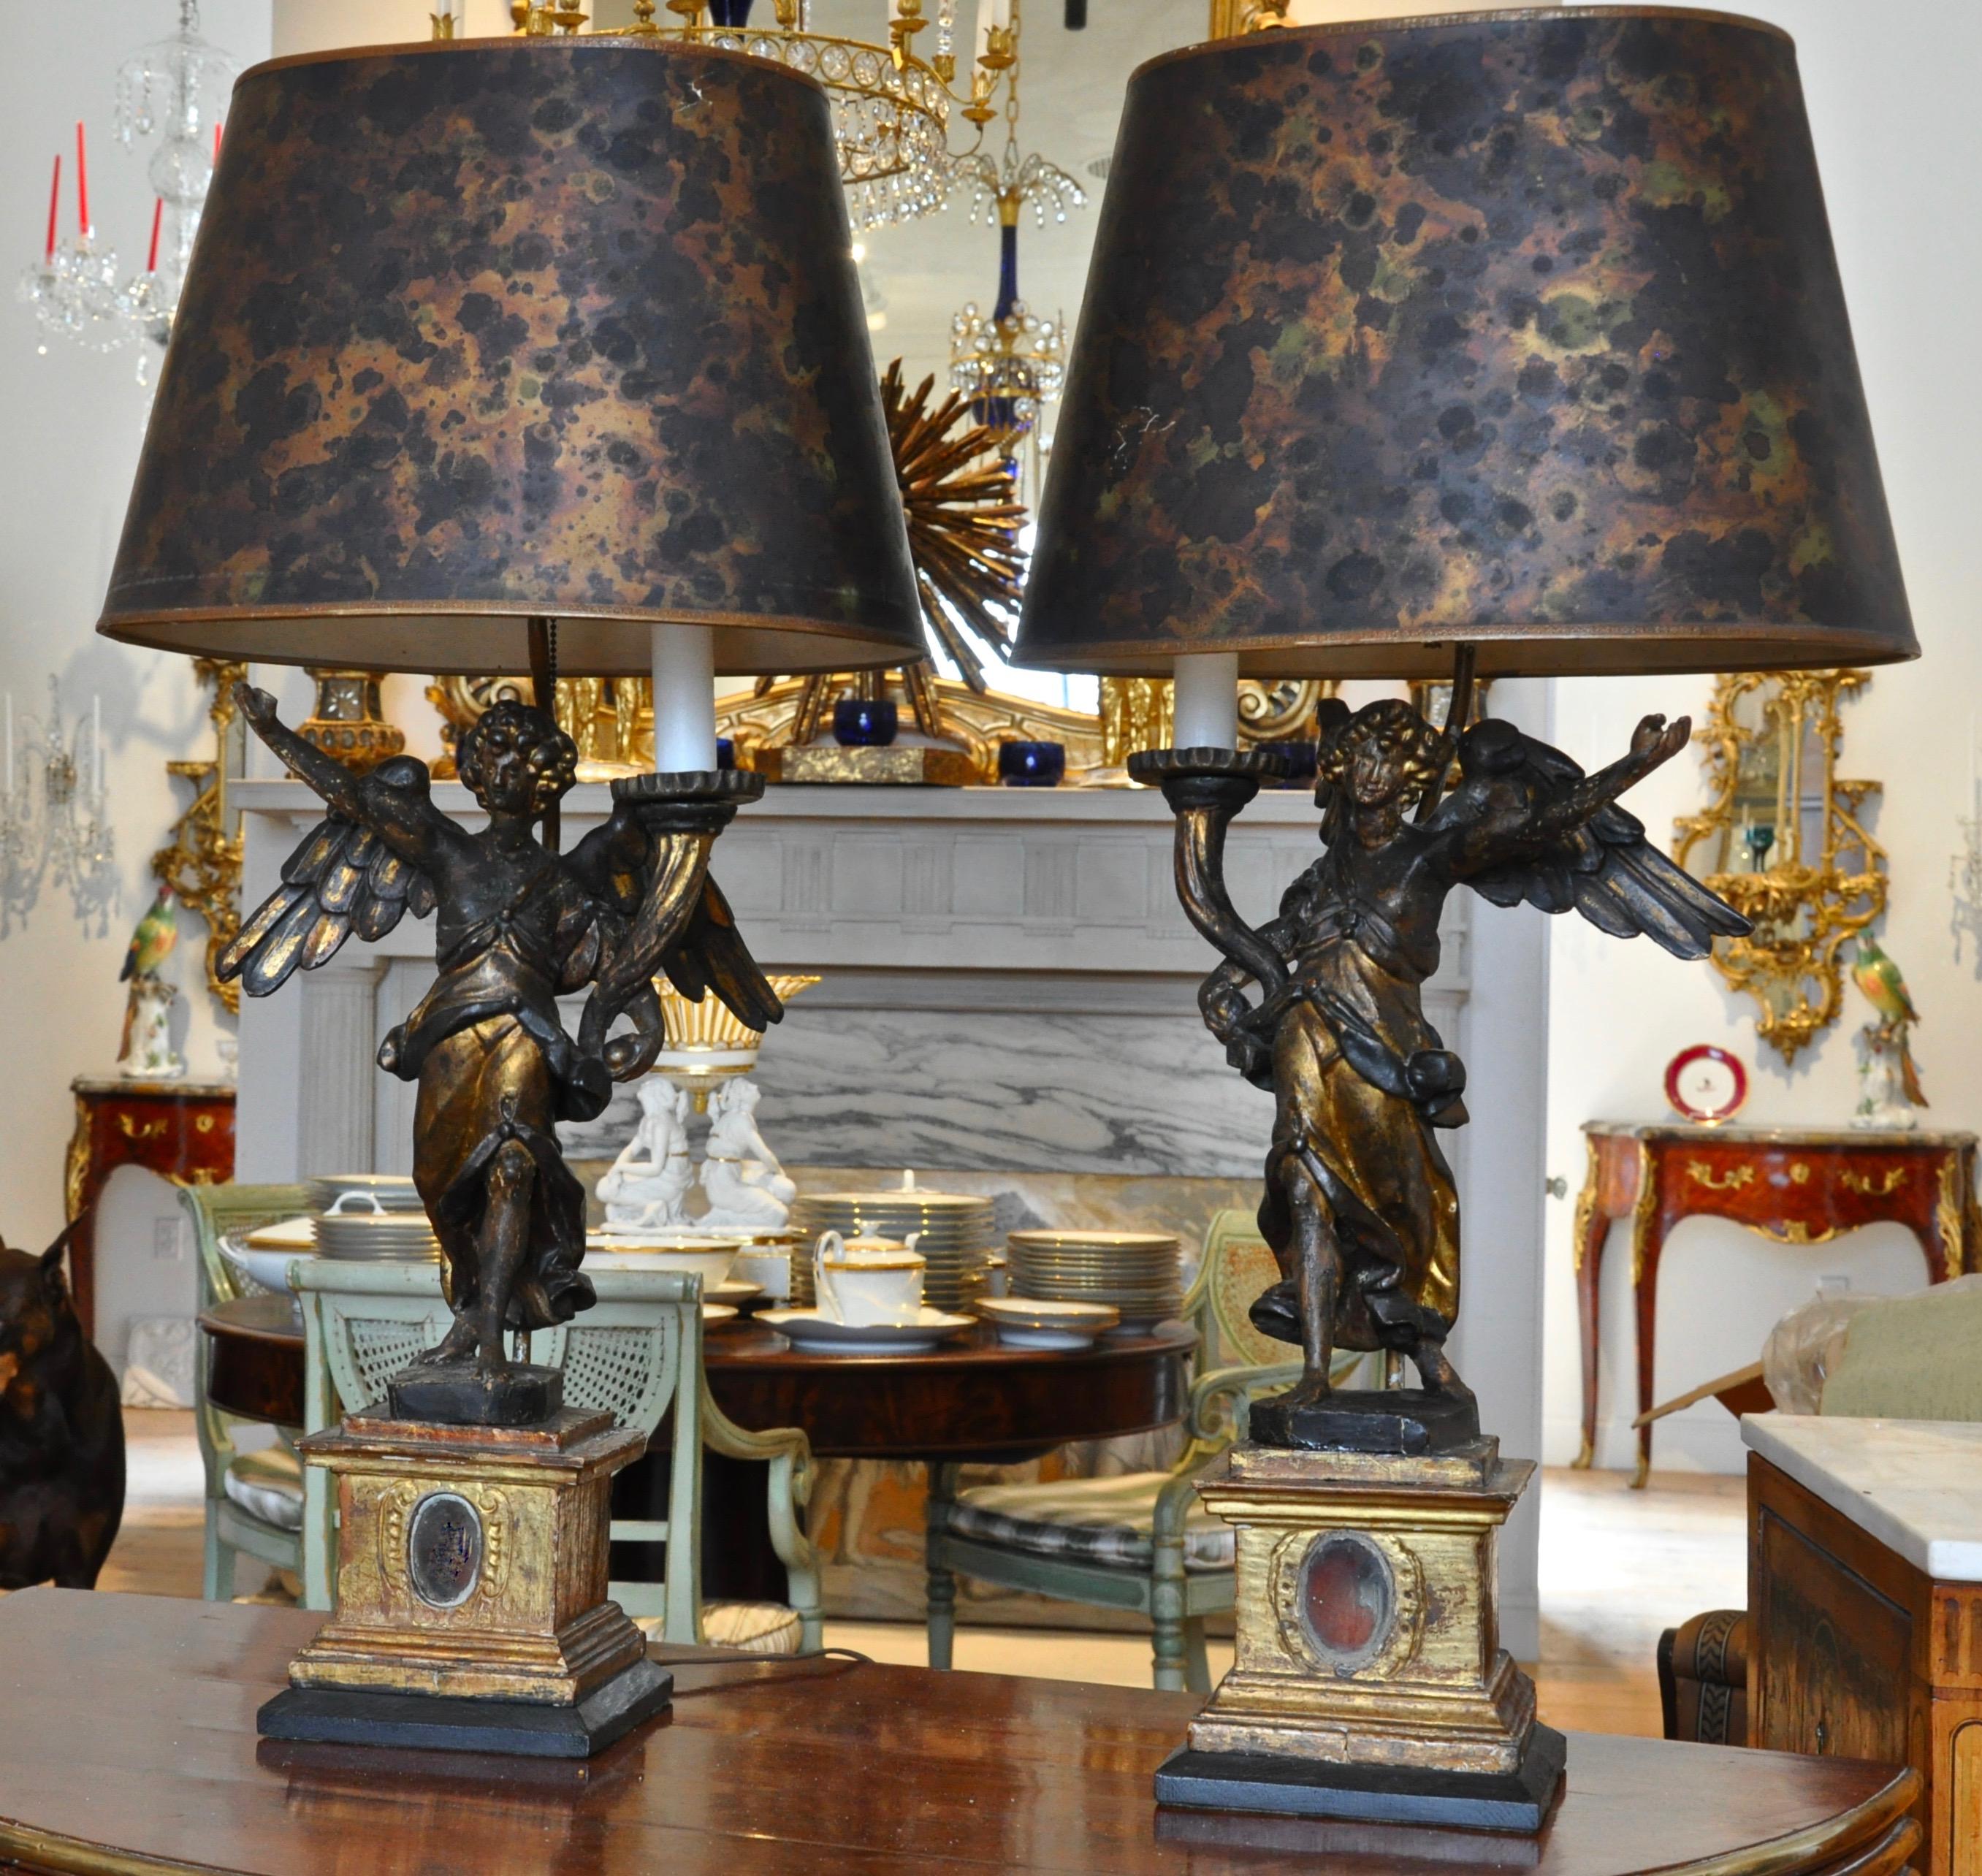 Pair of early 17th century Italian carved wood and gilt angel Pricket stick candelabra.

Jubilant Angels Holding Cornucopia which holds single pricket for a candle. Each now mounted as lamps. Early and original surfaces showing quite the age and